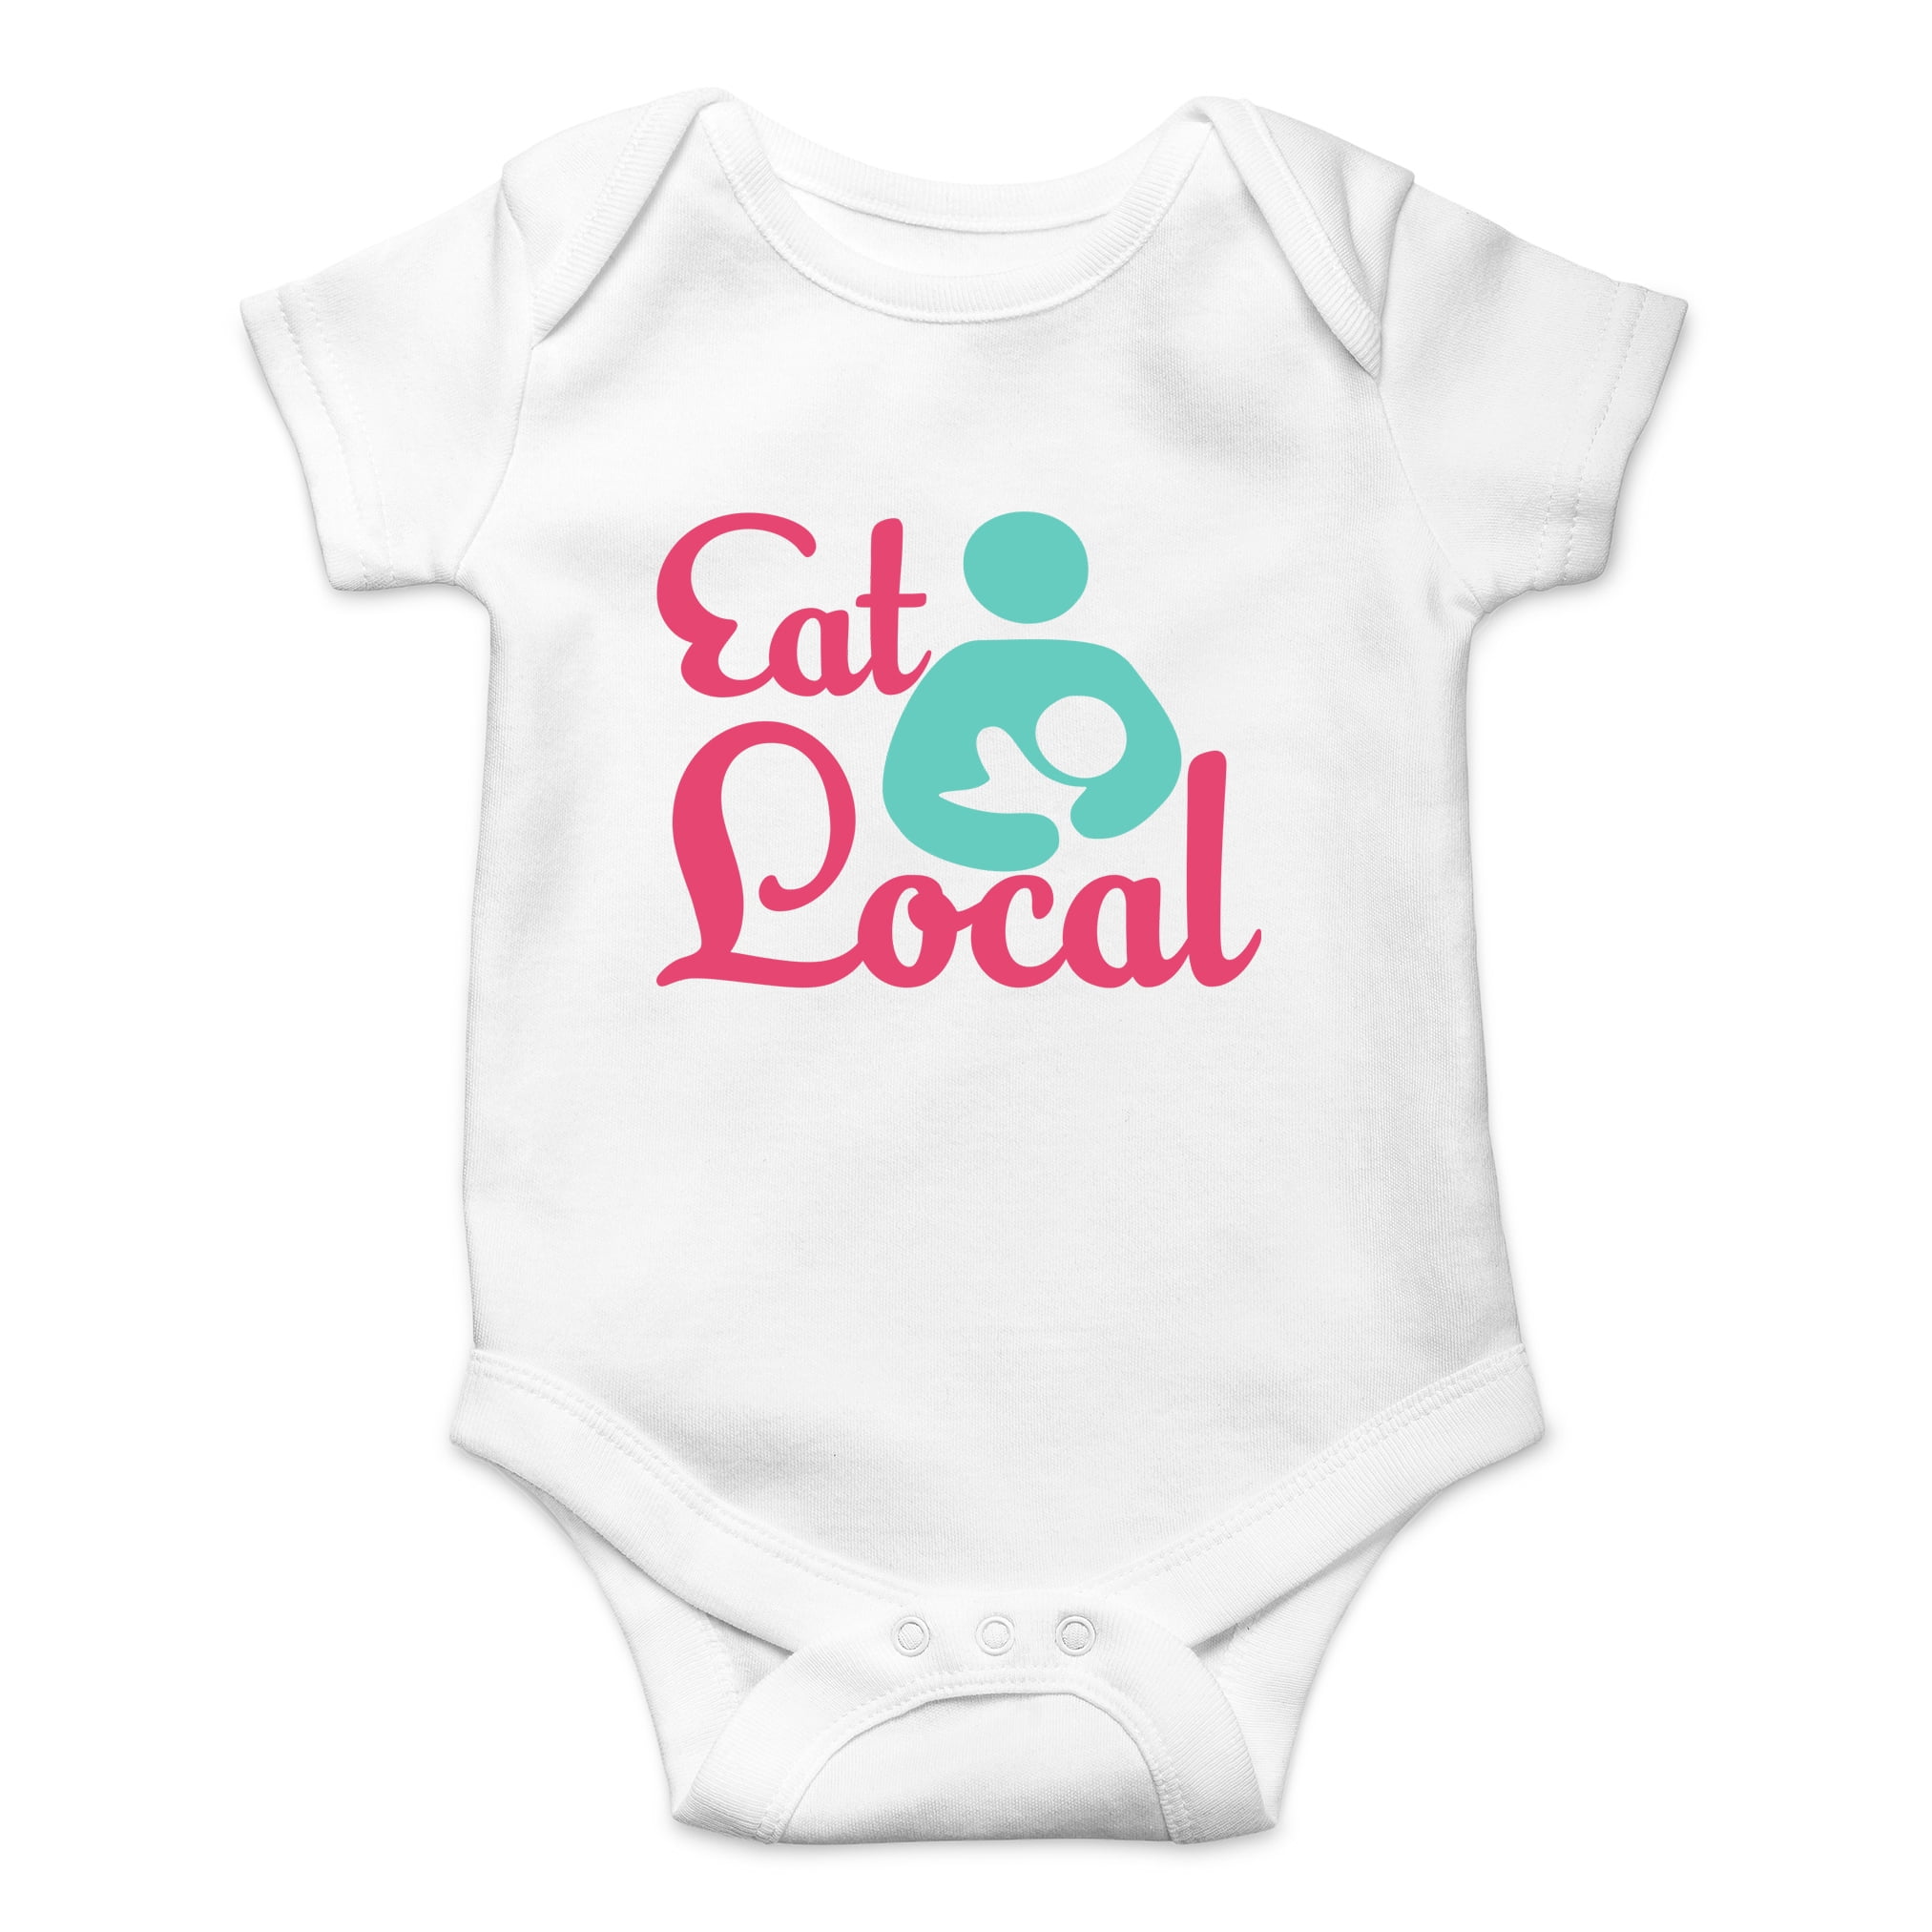 Eat Local - Breastfeeding Support - Cute Lactation - Cute One-Piece Infant  Baby Bodysuit